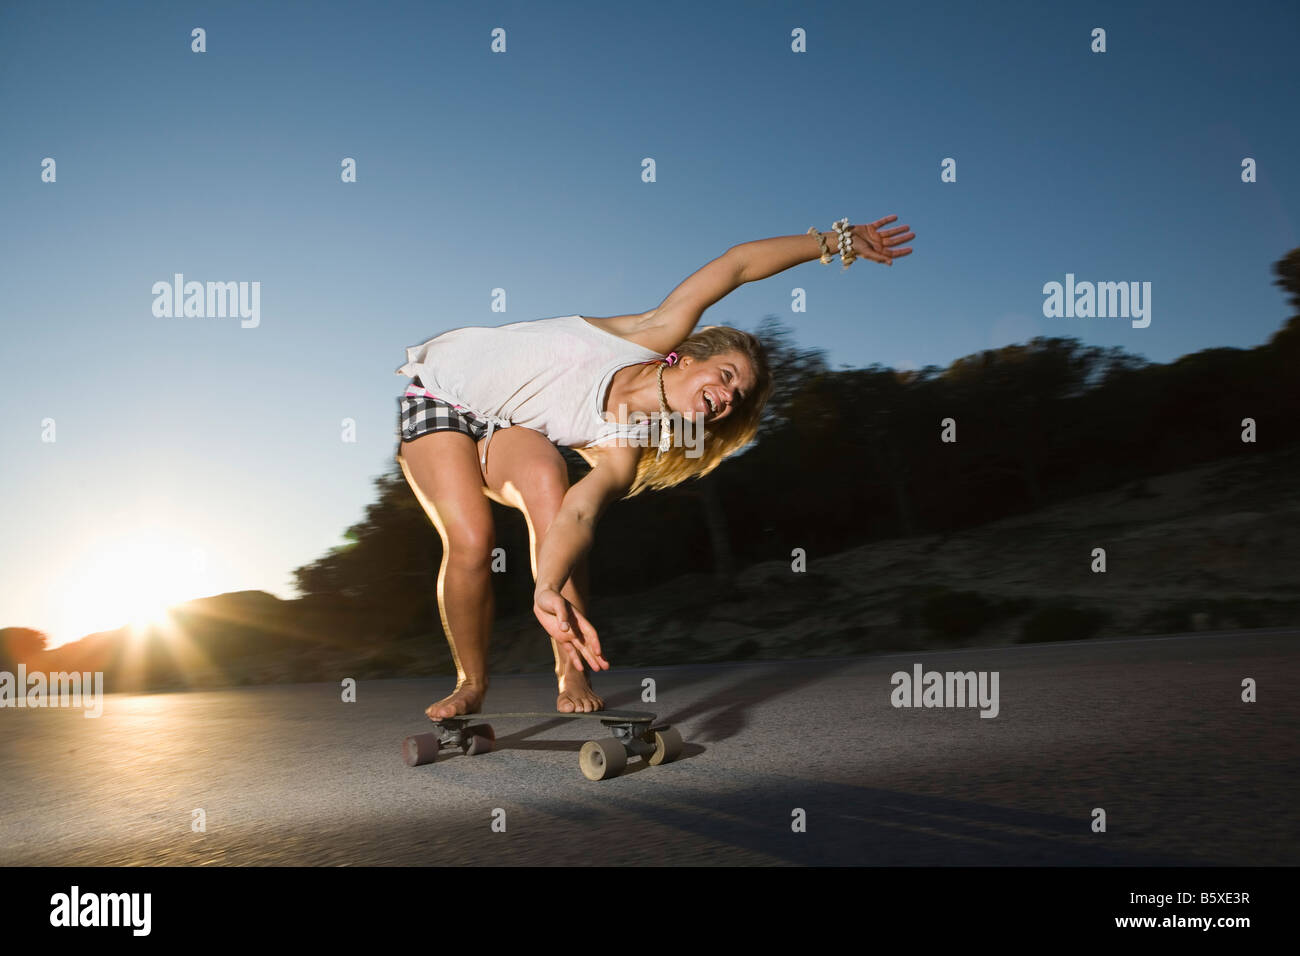 Young woman on skateboard Stock Photo